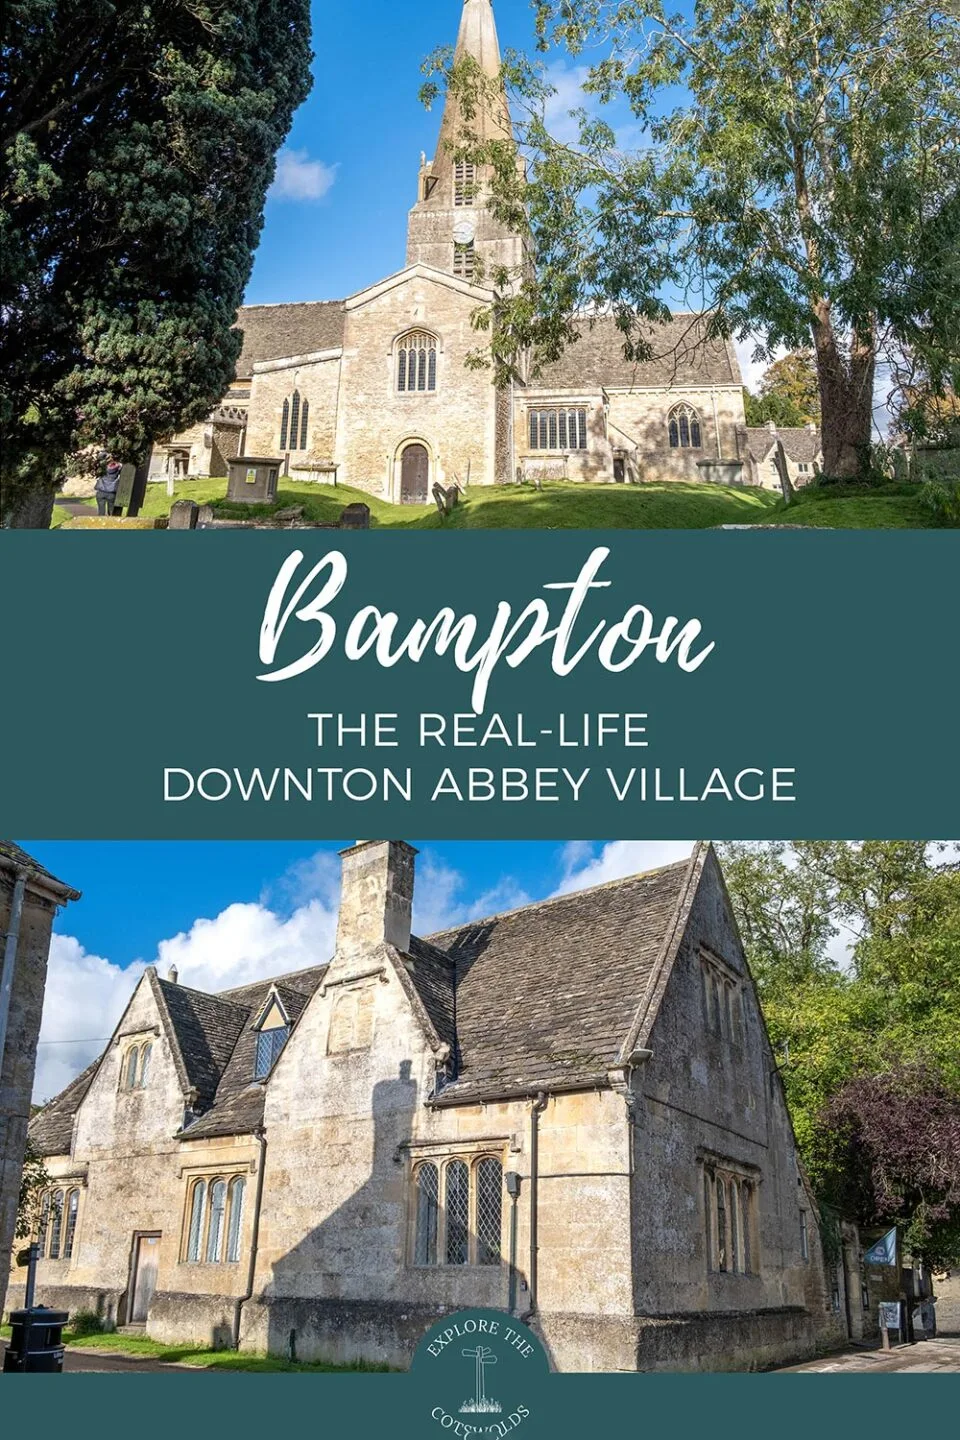 A guide to visiting the real-life Downton Abbey Village of Bampton in Oxfordshire, with filming locations from the TV show and films | Downton Abbey filming locations | Bampton Dpwnton Abbey locations | Downton Abbey in Bampton | Bampton Oxfordshire